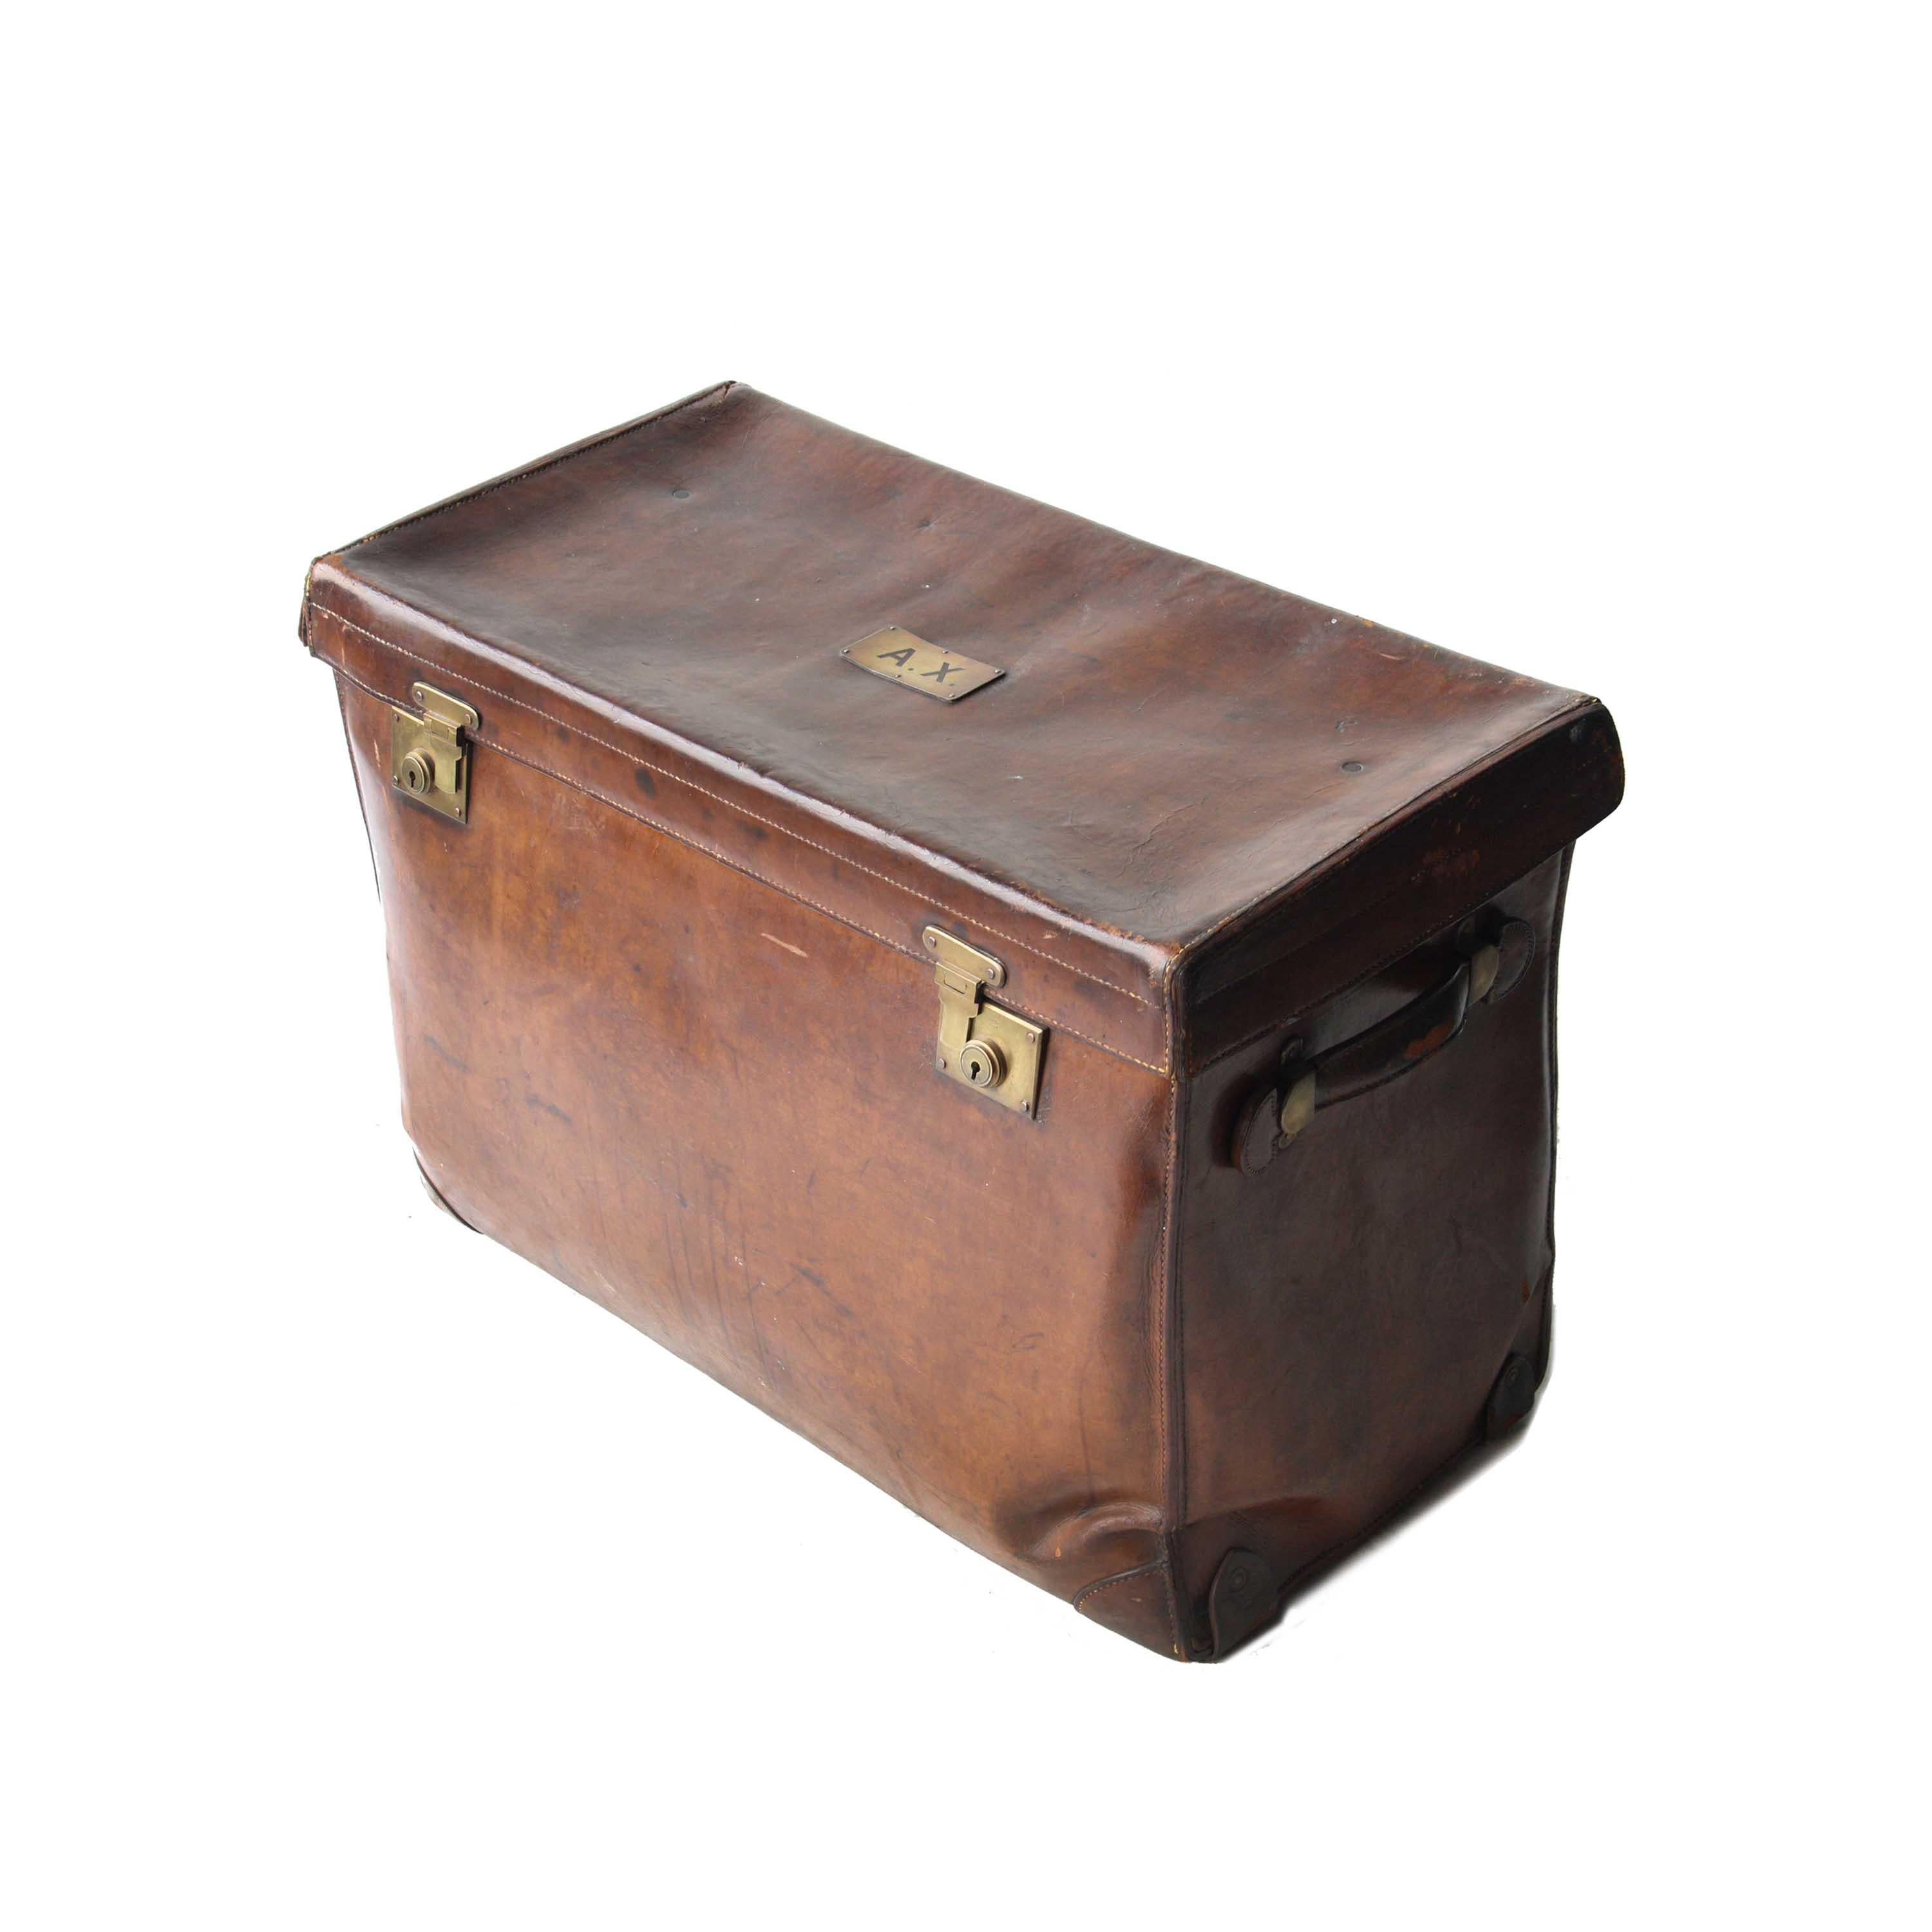 Trunk made of leather with a bronze plaque with initials engraved on the upper cover and a stamp of origin inside, London, 1930.